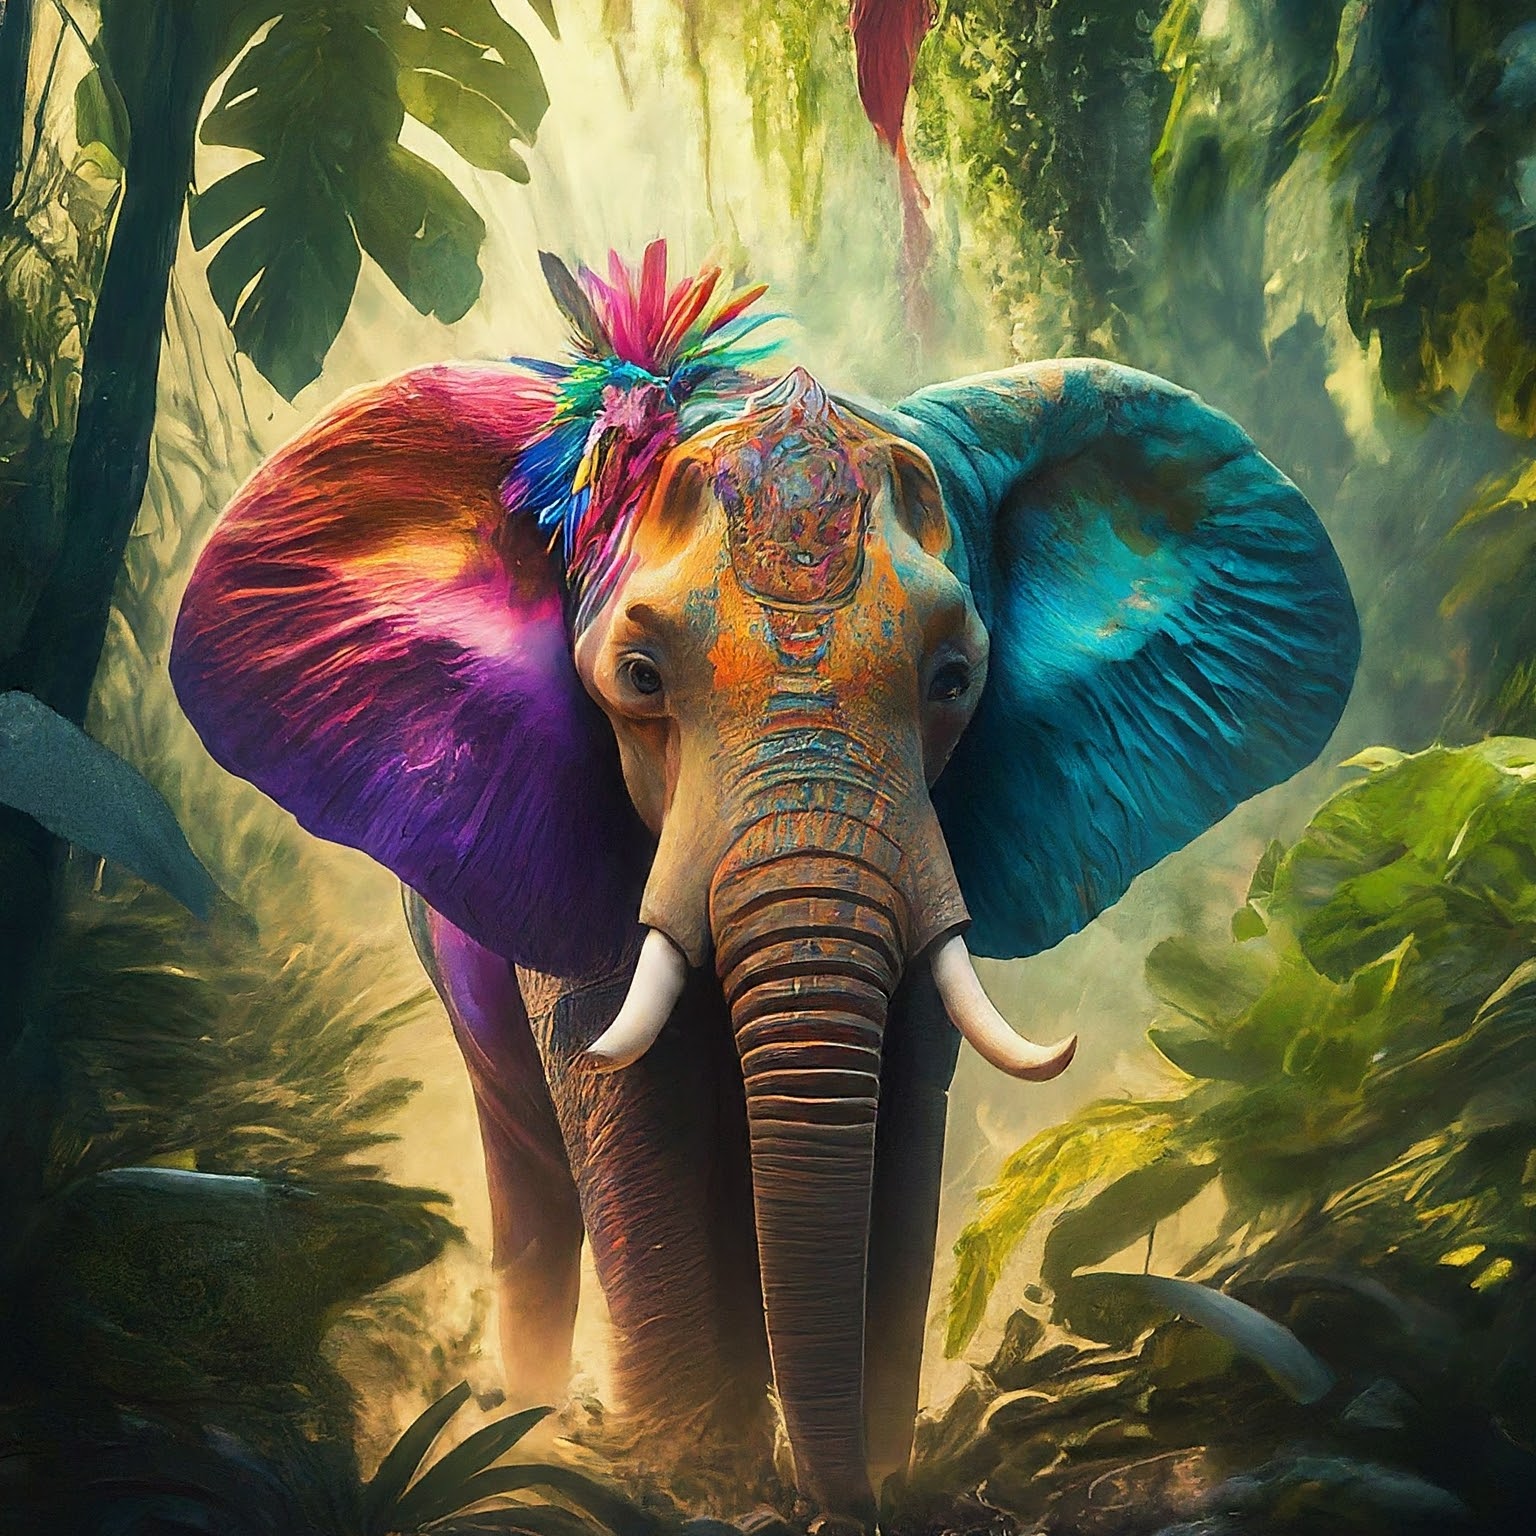 An image of an elephant walking in the jungle with vibrant colors over its body